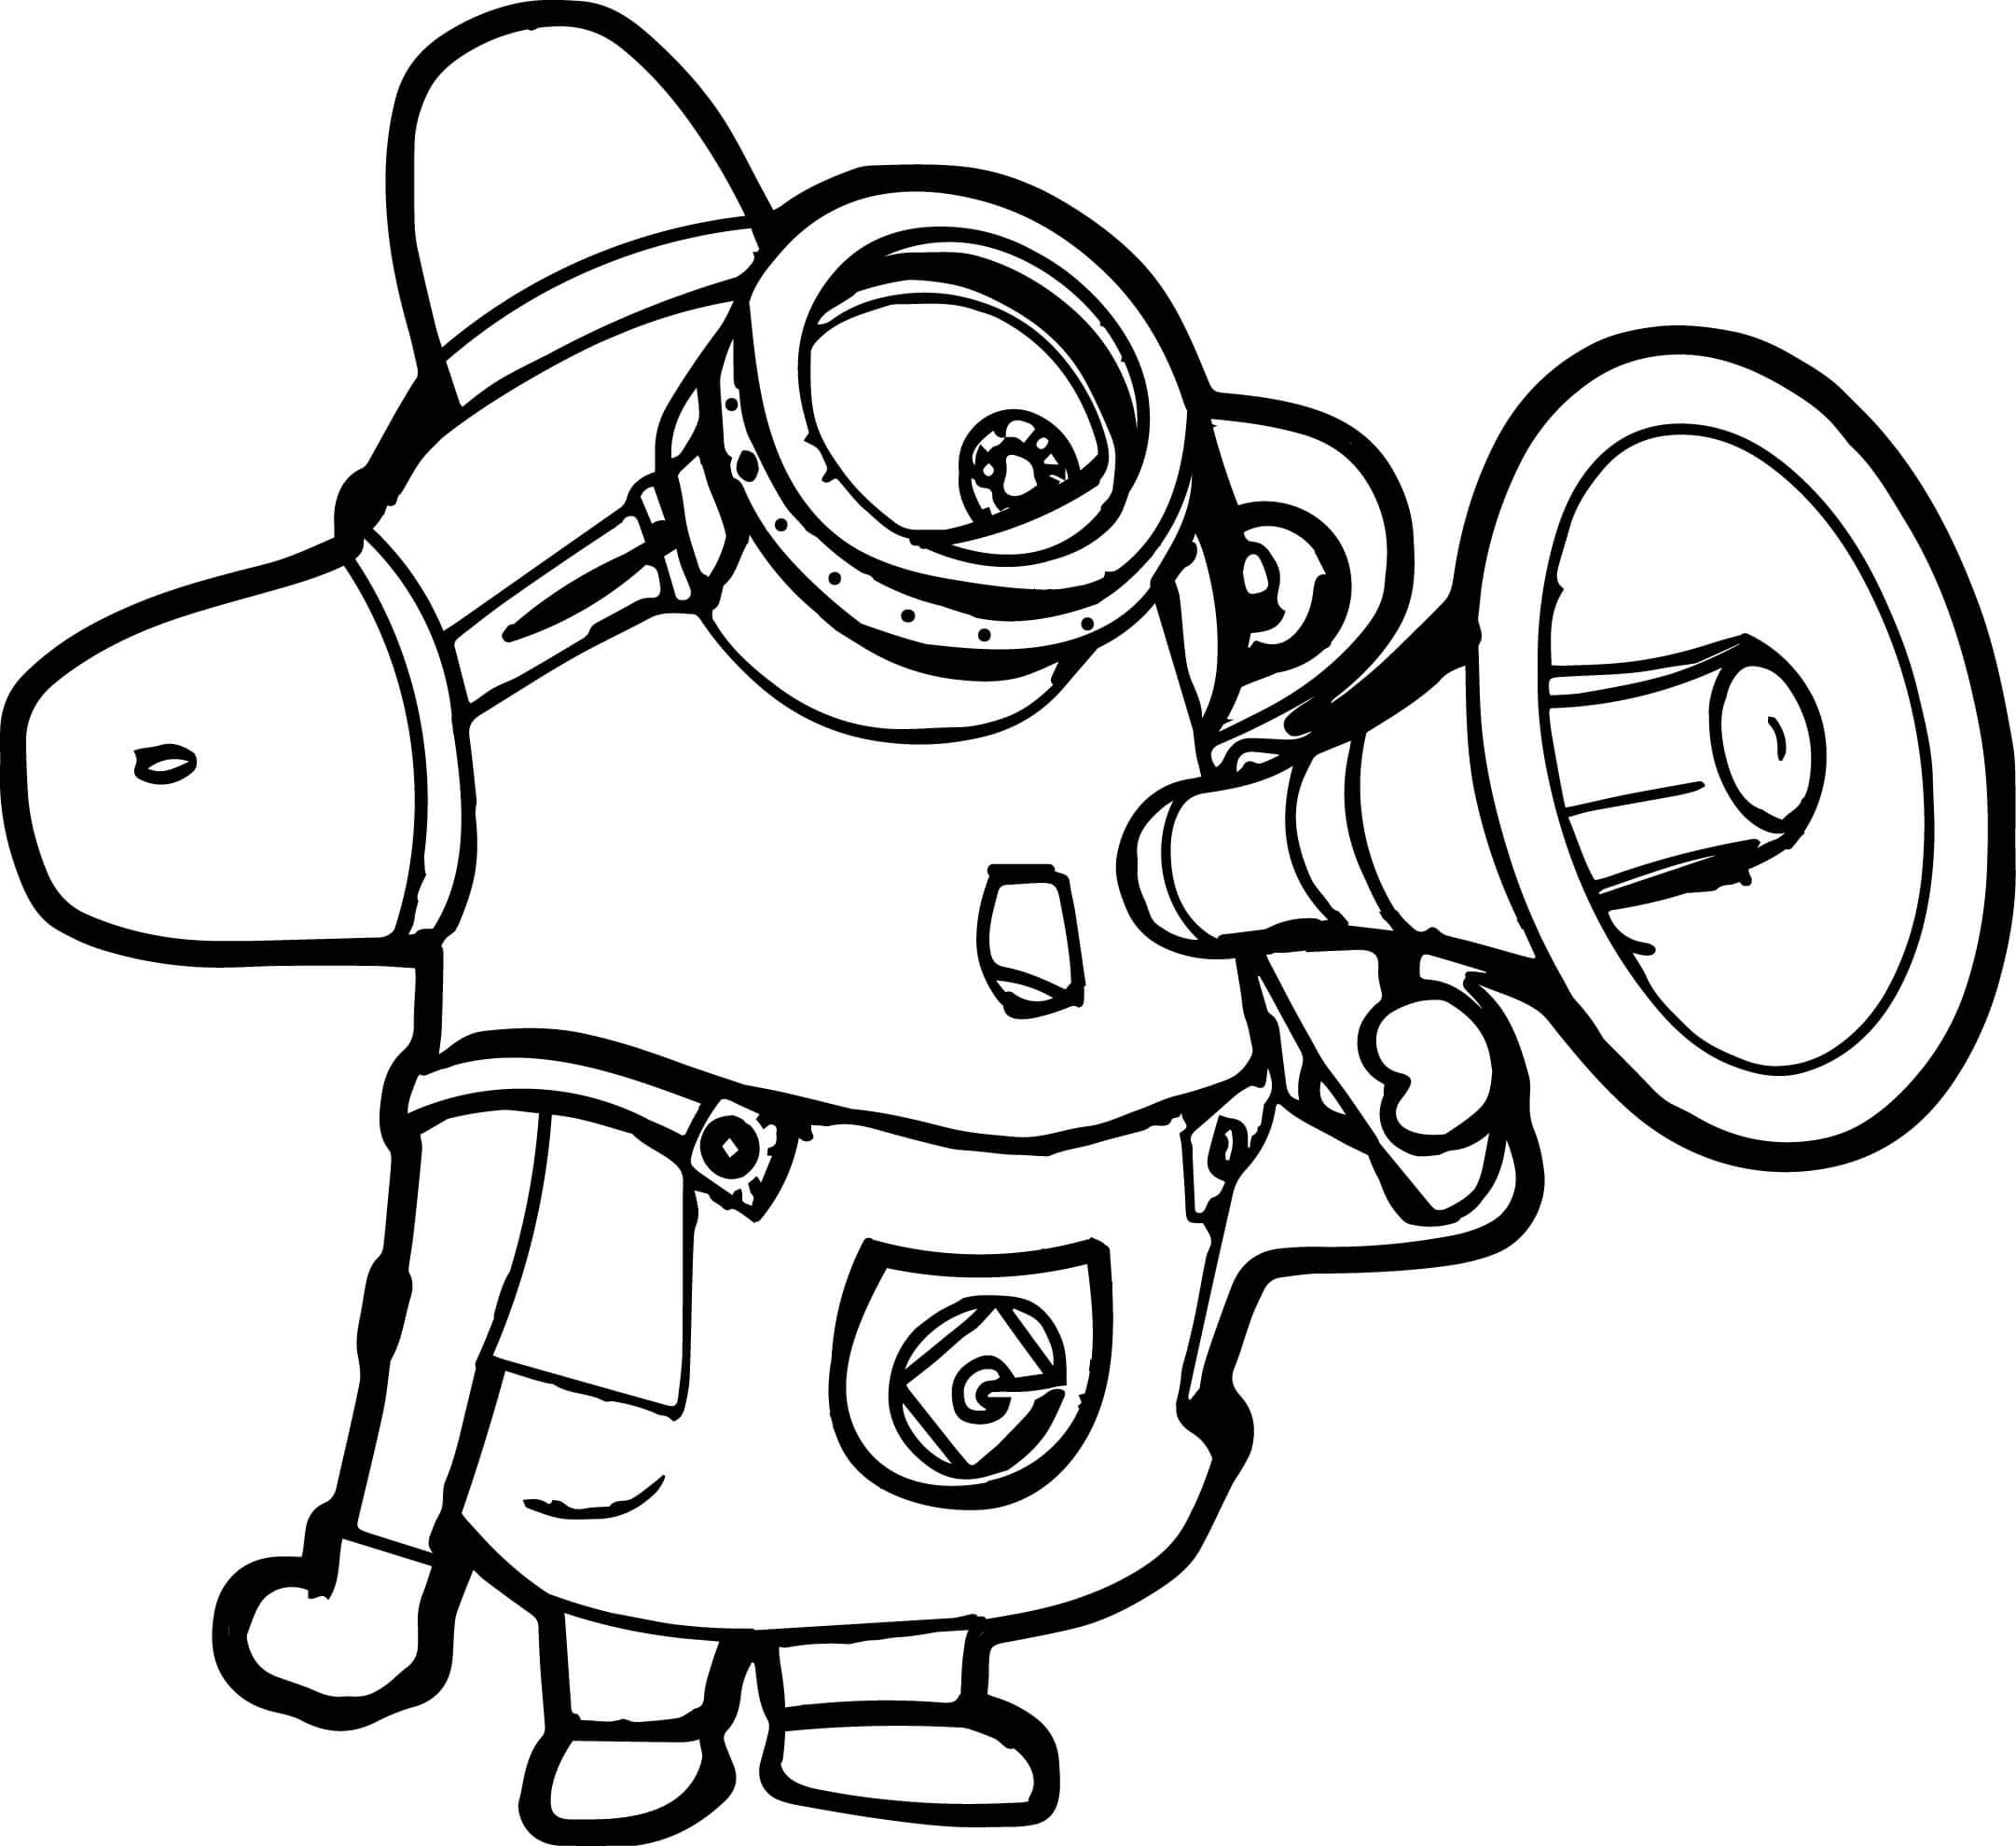 hello-minion-minions-coloring-page-wecoloringpage-the-best-porn-website